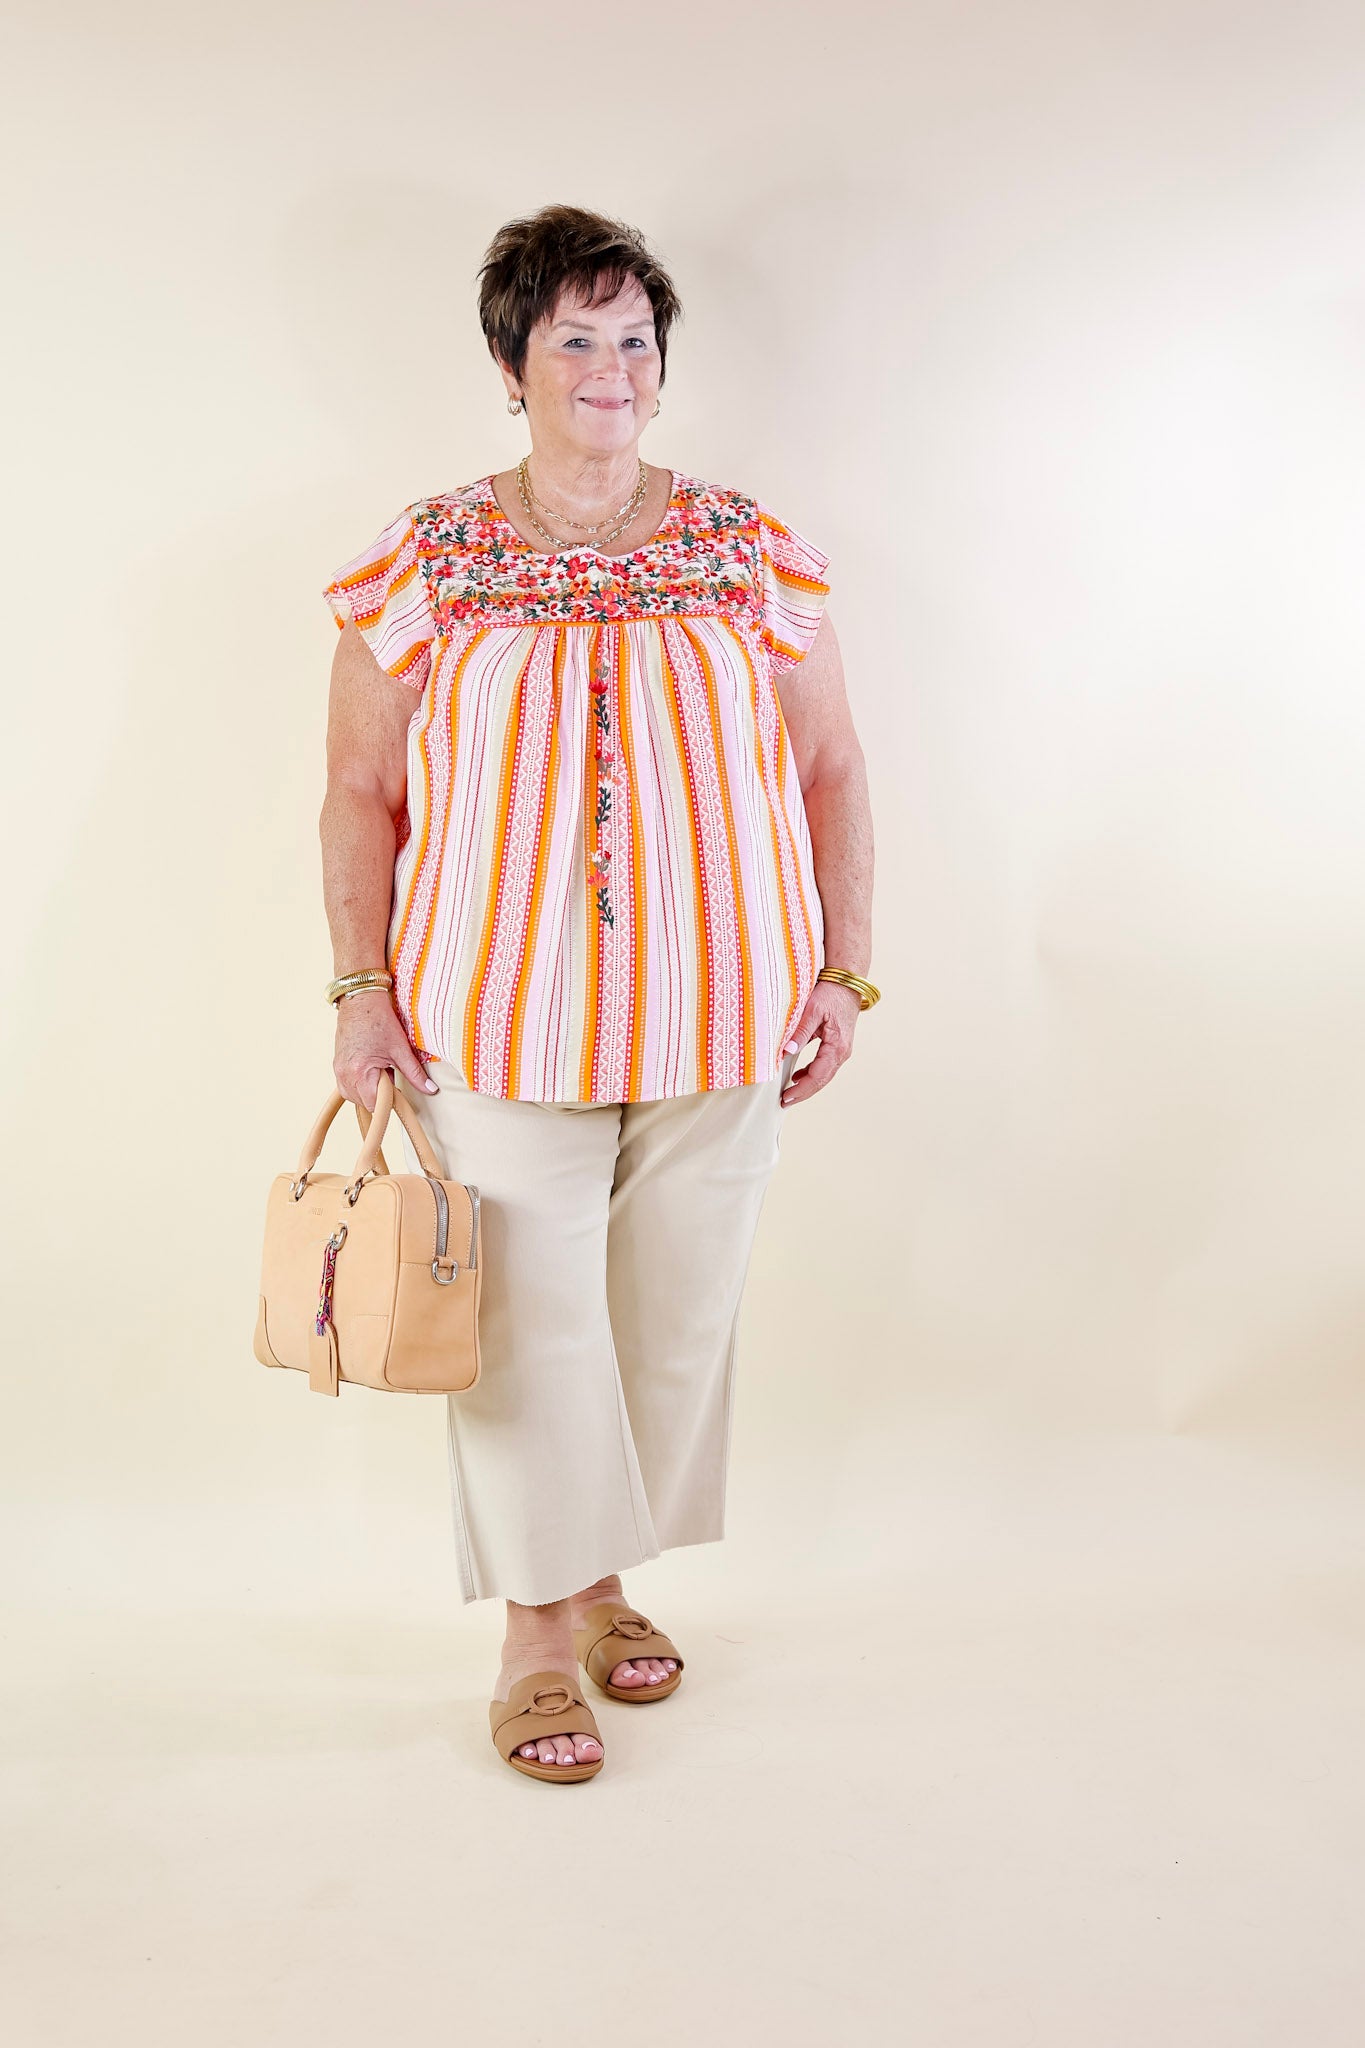 Lajitas Lady Striped Babydoll Top with Floral Embroidery in Orange and Pink - Giddy Up Glamour Boutique